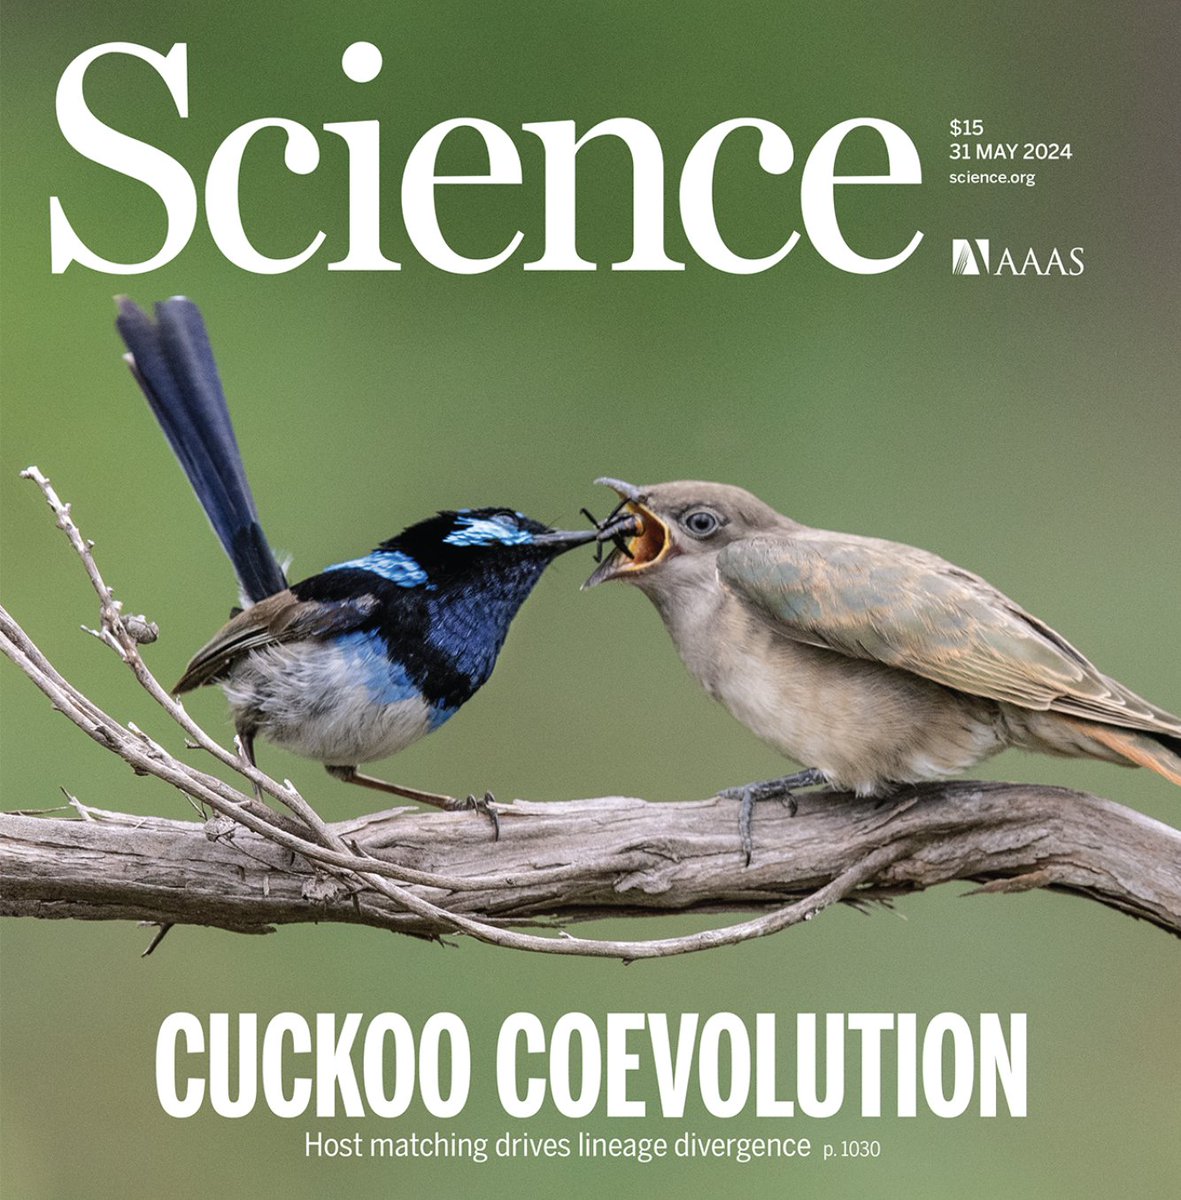 Hot on the heels of the Giant Hummer paper in PNAS, another big-hitting bird speciation story appears, this time gracing the cover of Science. Langmore et al. show that coevolution between parasitic cuckoos and their hosts may drive sympatric speciation. science.org/doi/10.1126/sc…